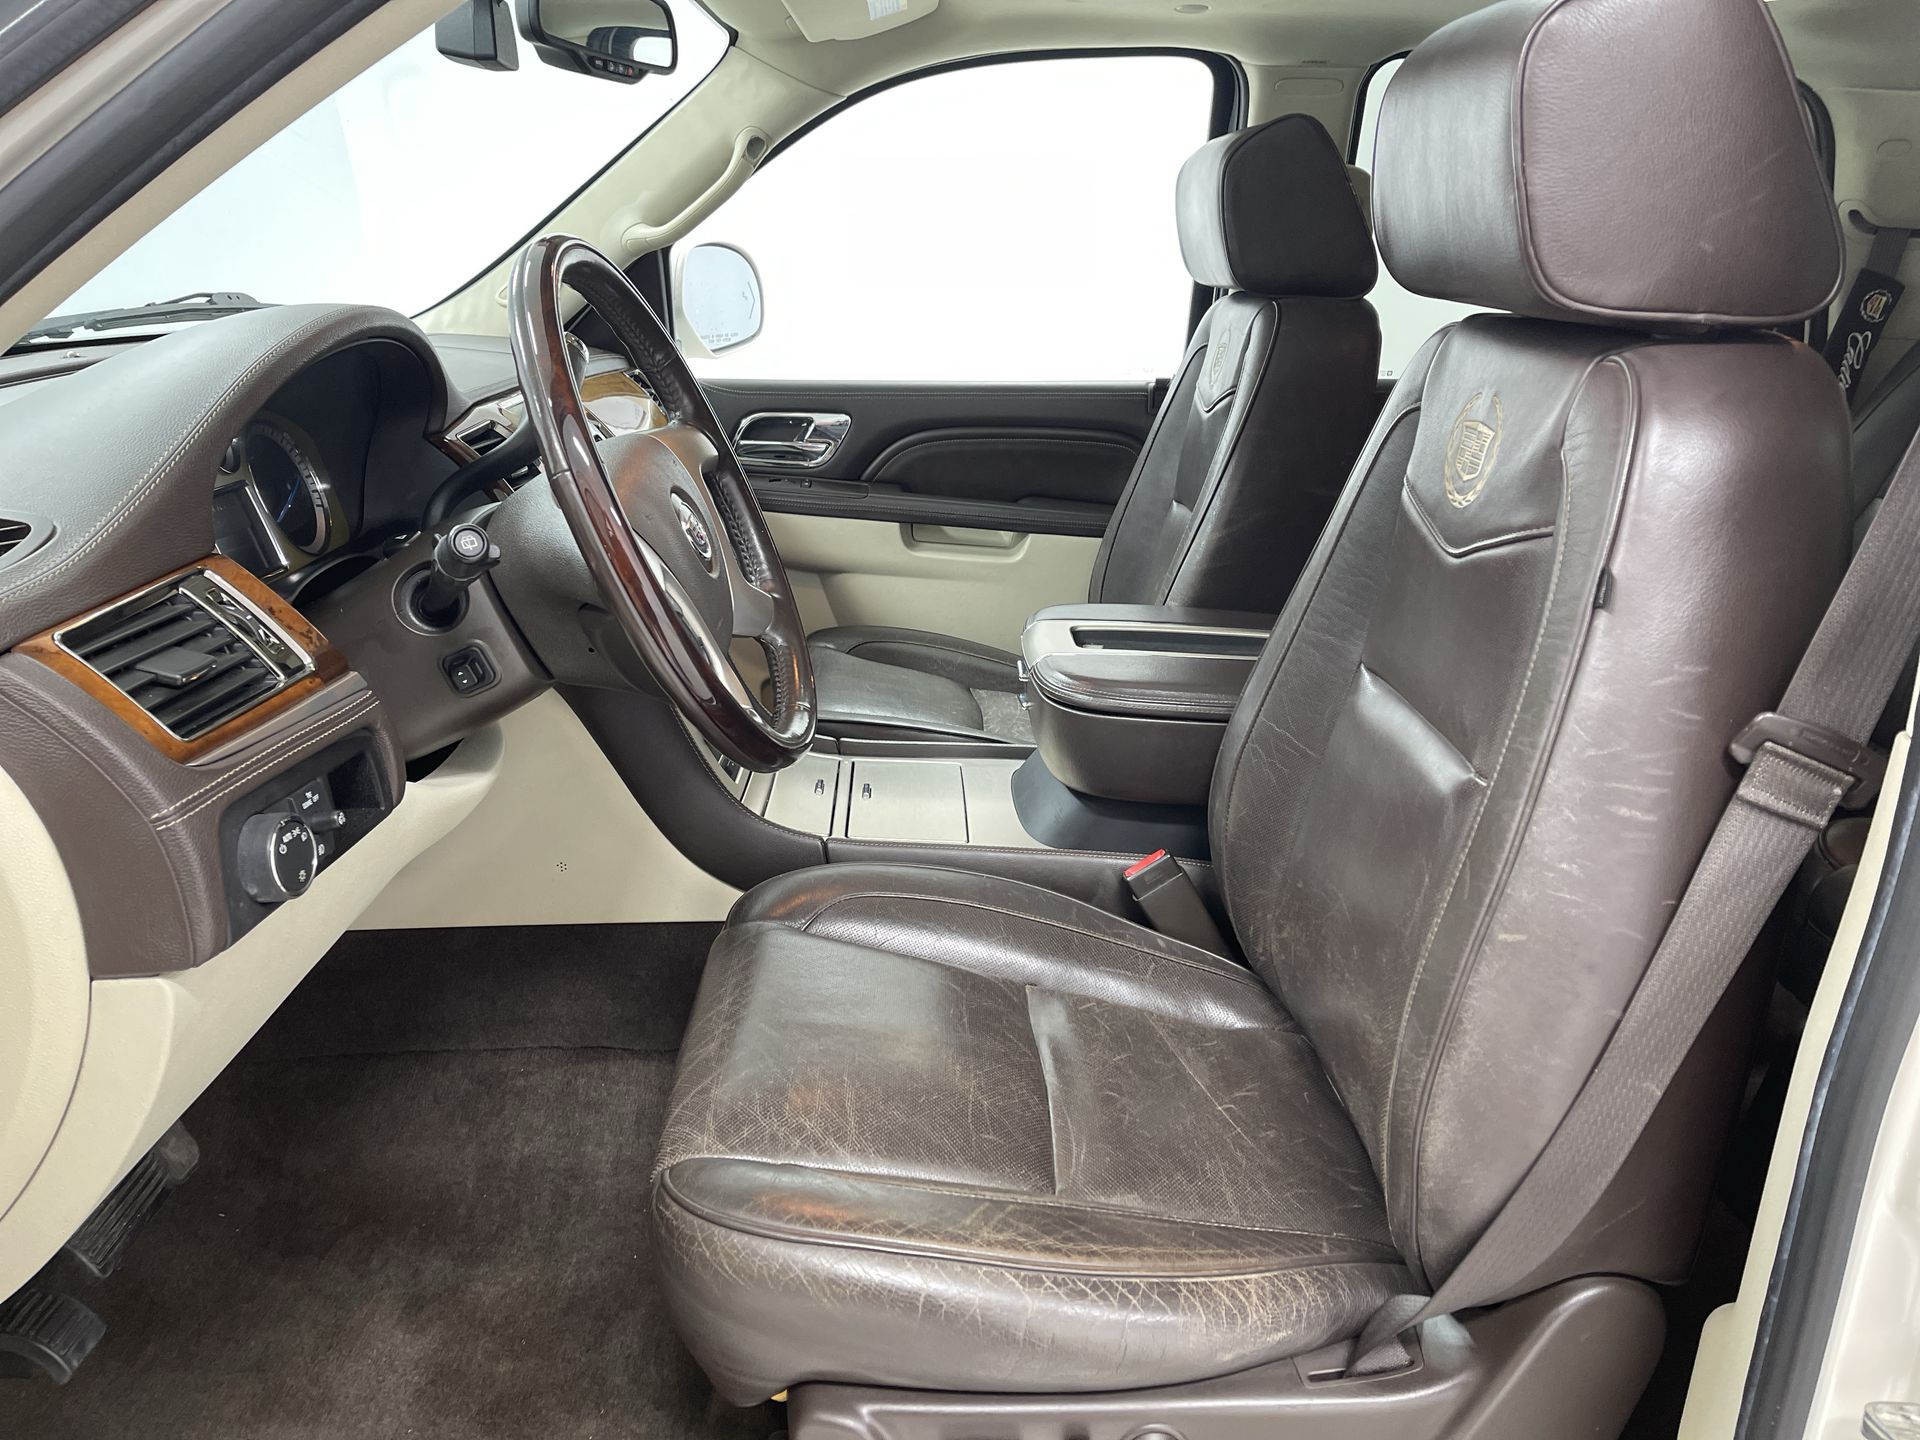 Specifically flow socket Used 2013 Cadillac Escalade For Sale ($27,499) | Vroom